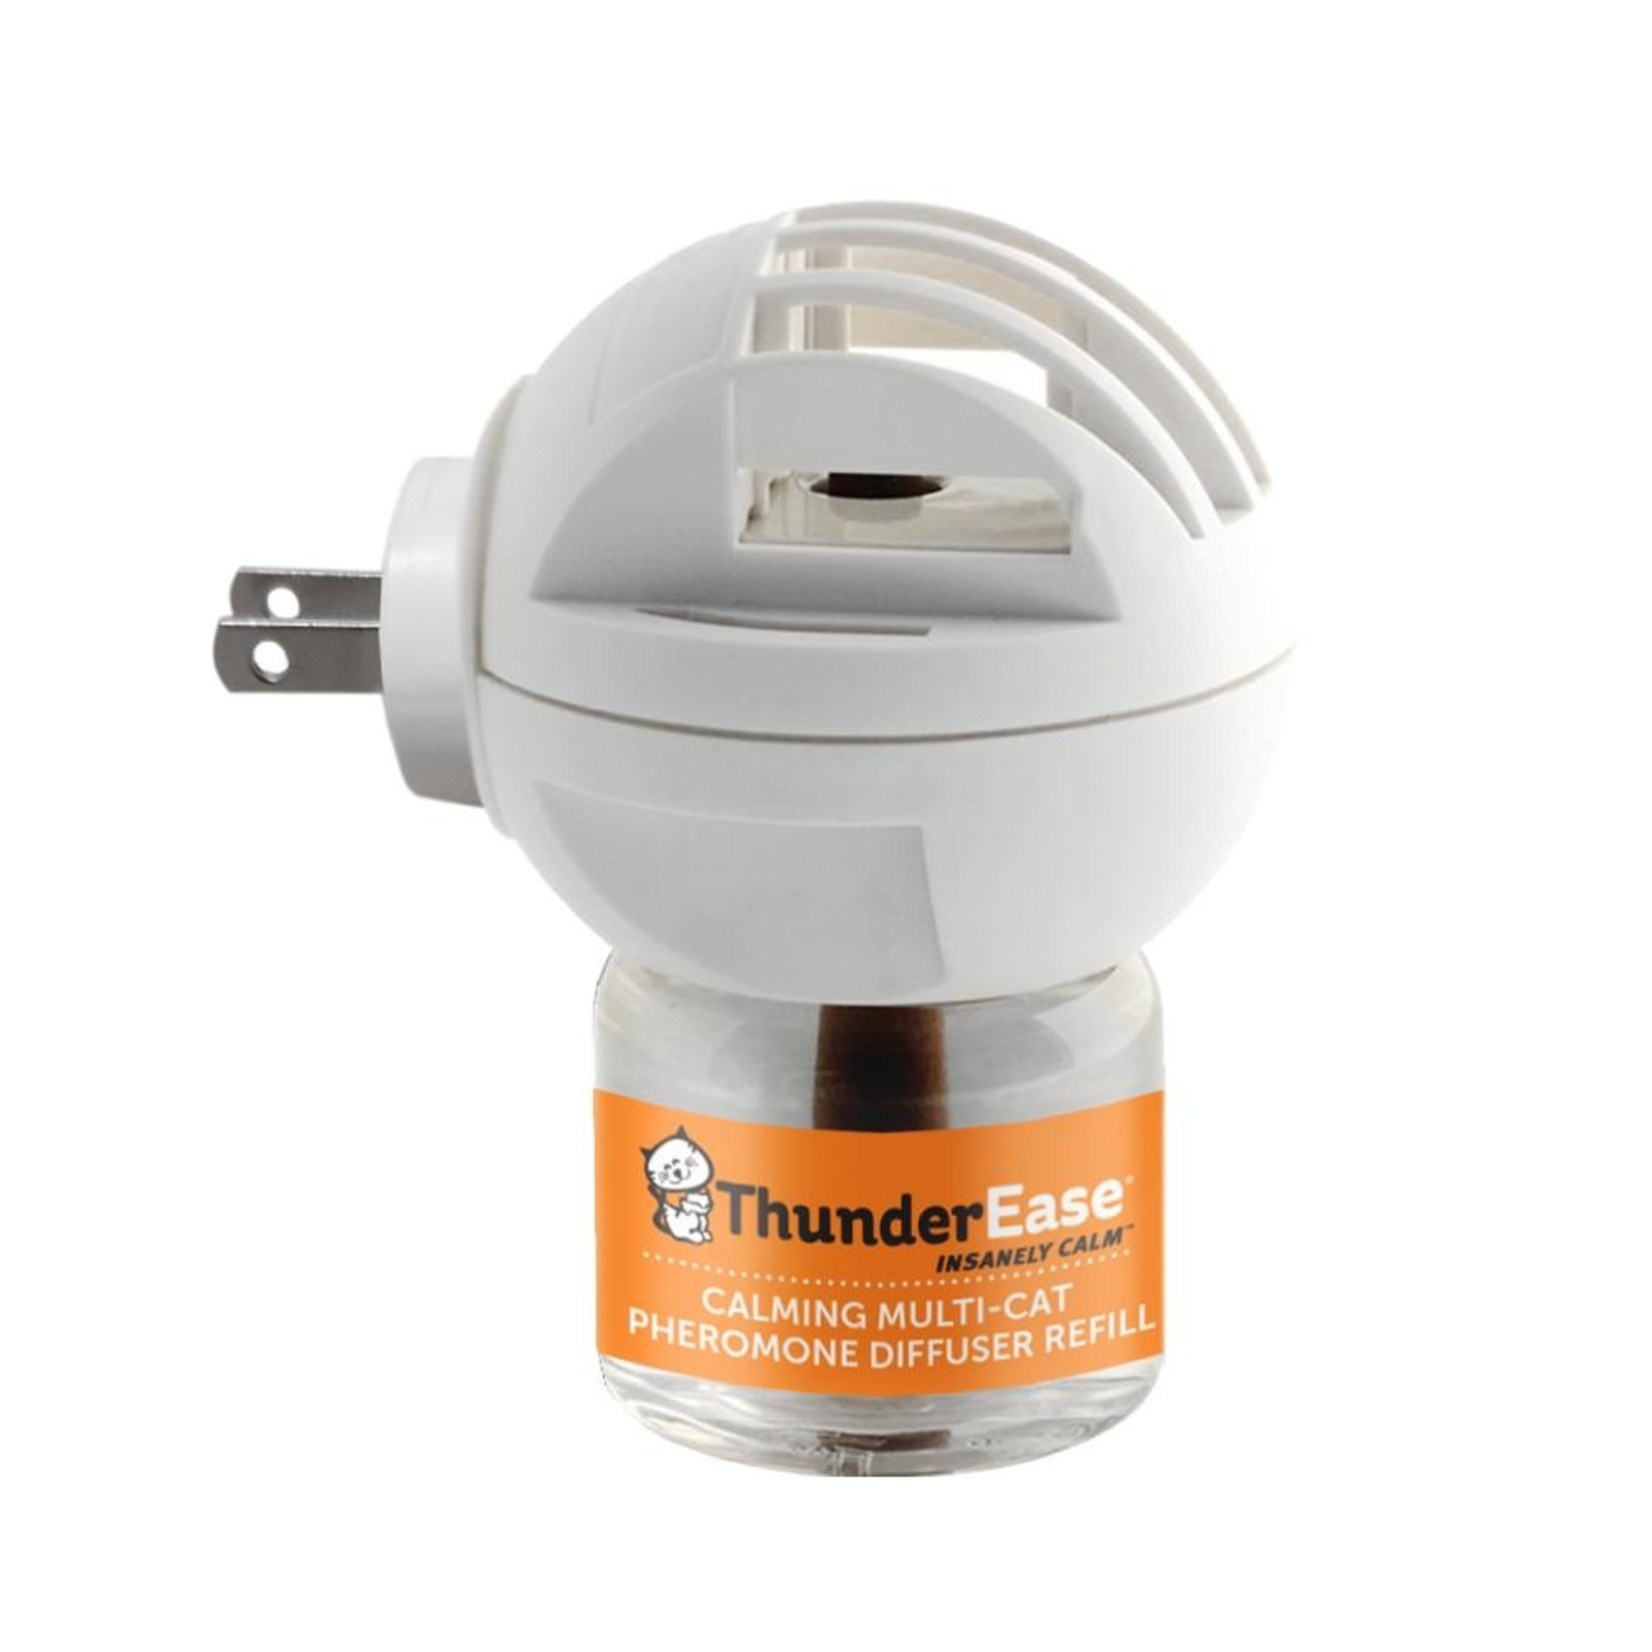 Thunderworks Thunderworks ThunderEase Multi Cat Pheromone Diffuser Kit with Diffuser and 30 Day Refill